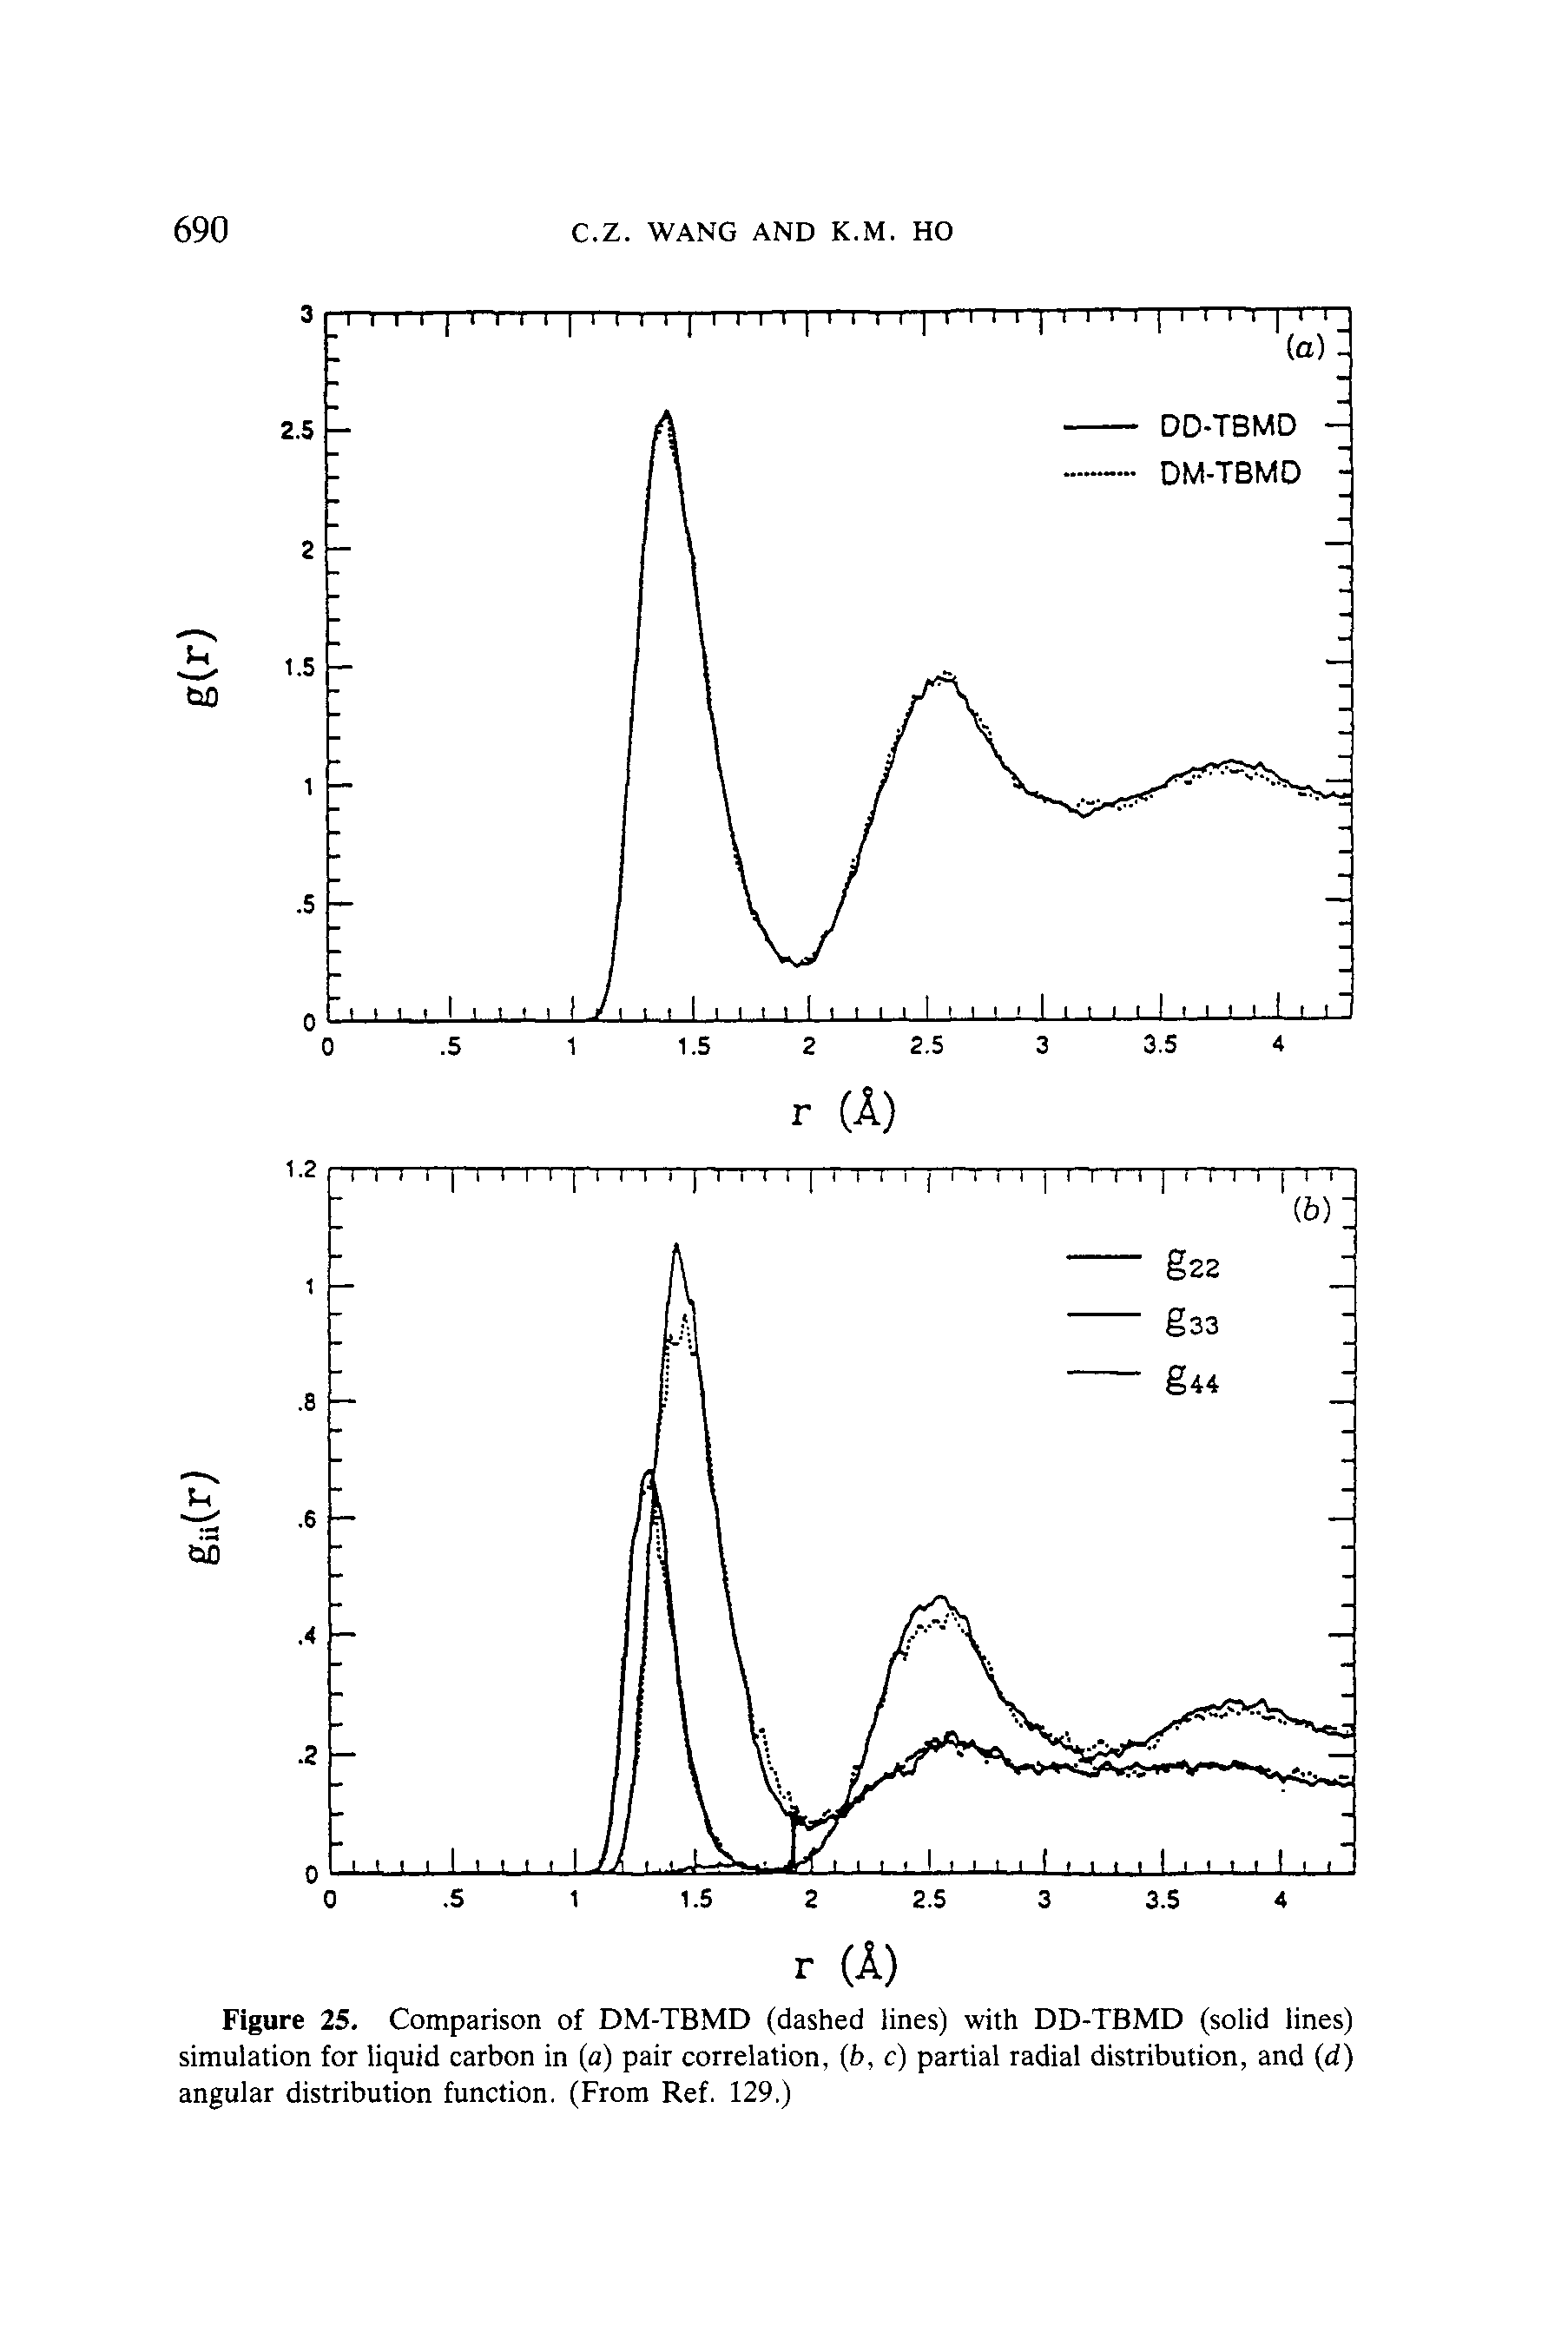 Figure 25. Comparison of DM-TBMD (dashed lines) with DD-TBMD (solid lines) simulation for liquid carbon in (a) pair correlation, (b, c) partial radial distribution, and (d) angular distribution function. (From Ref. 129.)...